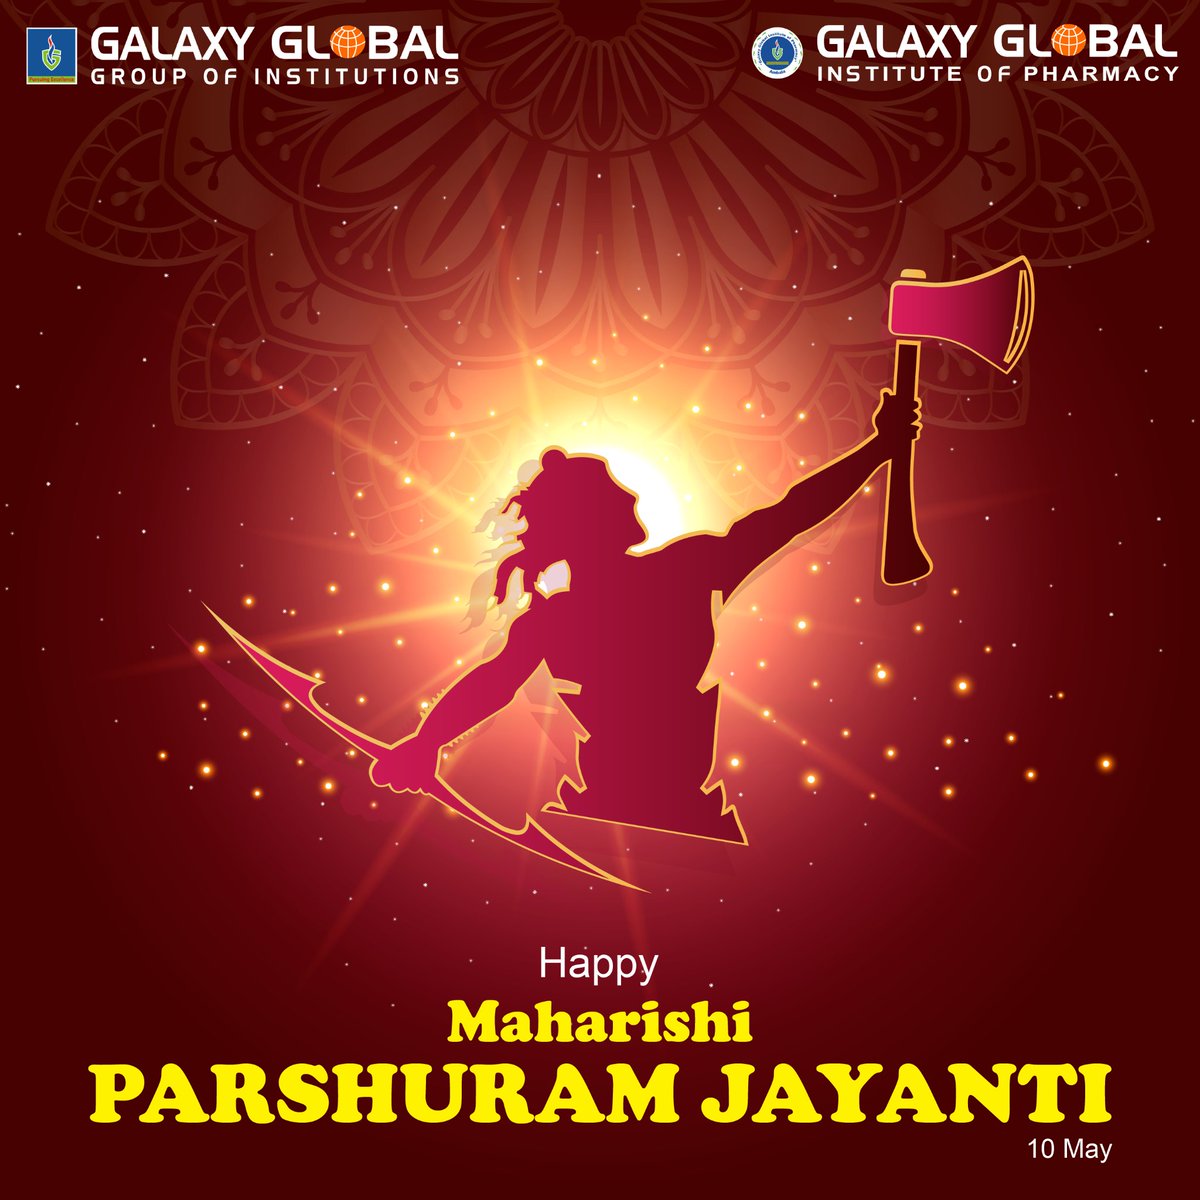 Wishing everyone a blessed Parshuram Jayanti! Let's celebrate the birth of Lord Parshuram and take inspiration from his wisdom. #ParshuramJayanti #gggi #wishes #blessings